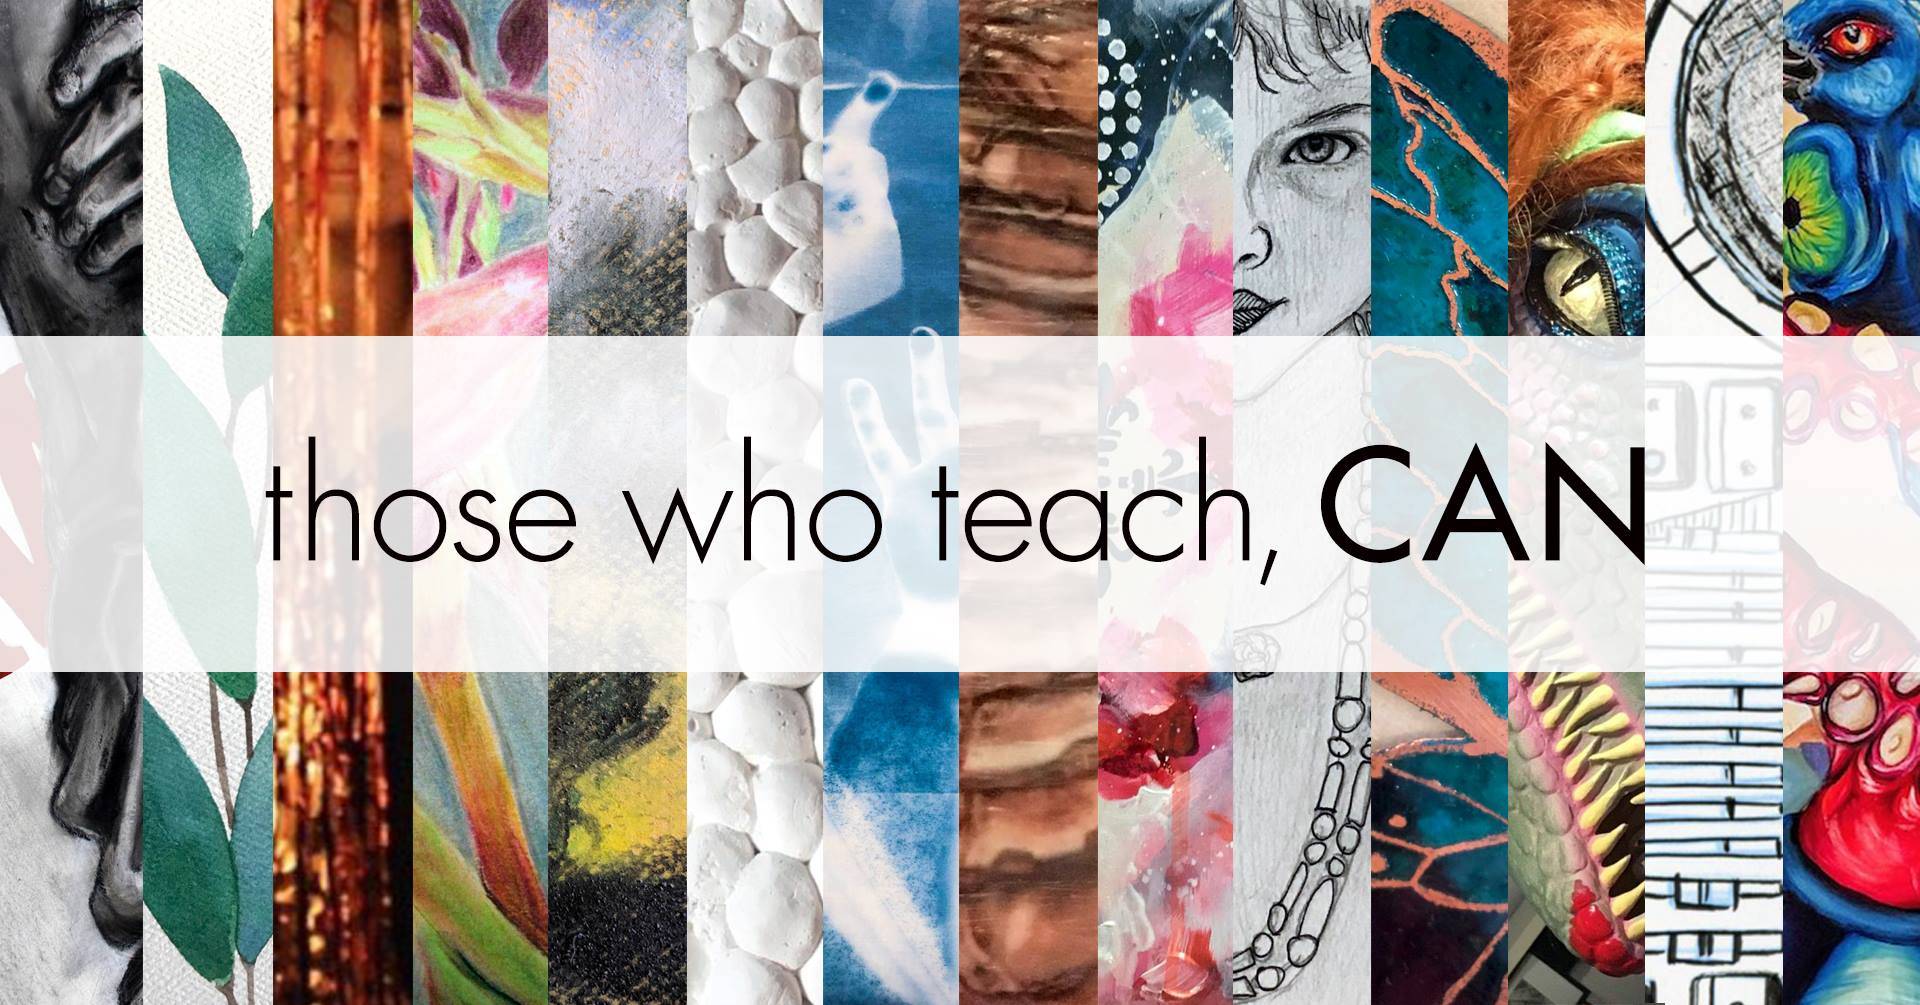 40 North exhibit proves “Those Who Teach, Can”  and do make inspiring art